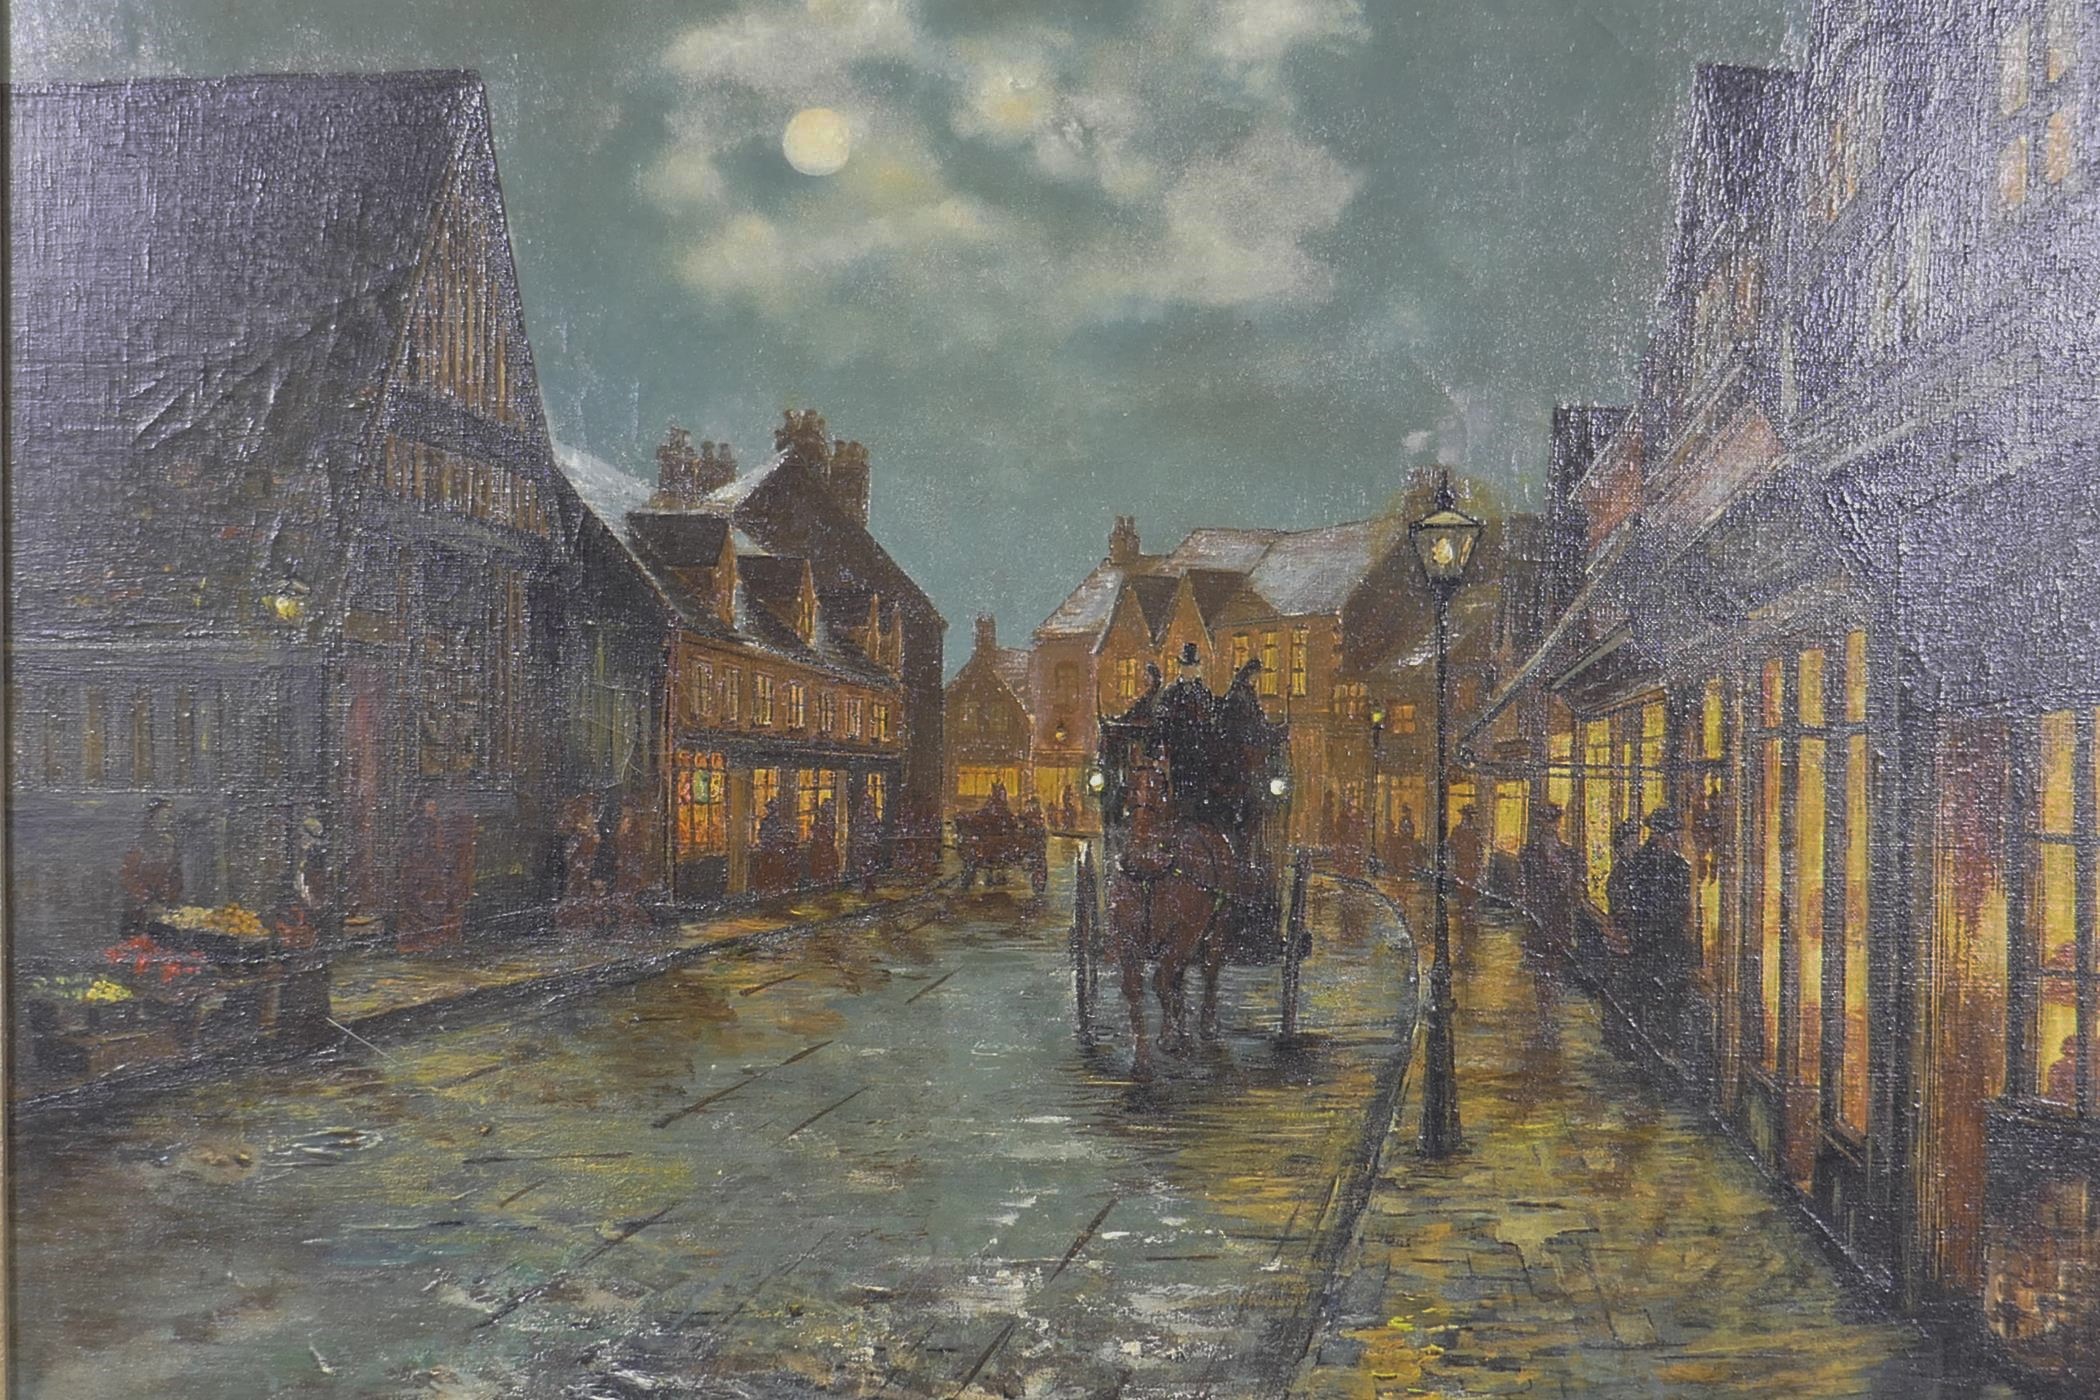 D.B. Wilson, Knowle Warwickshire, No. 21, oil on canvas, signed and dated 1976, 16" x 20"